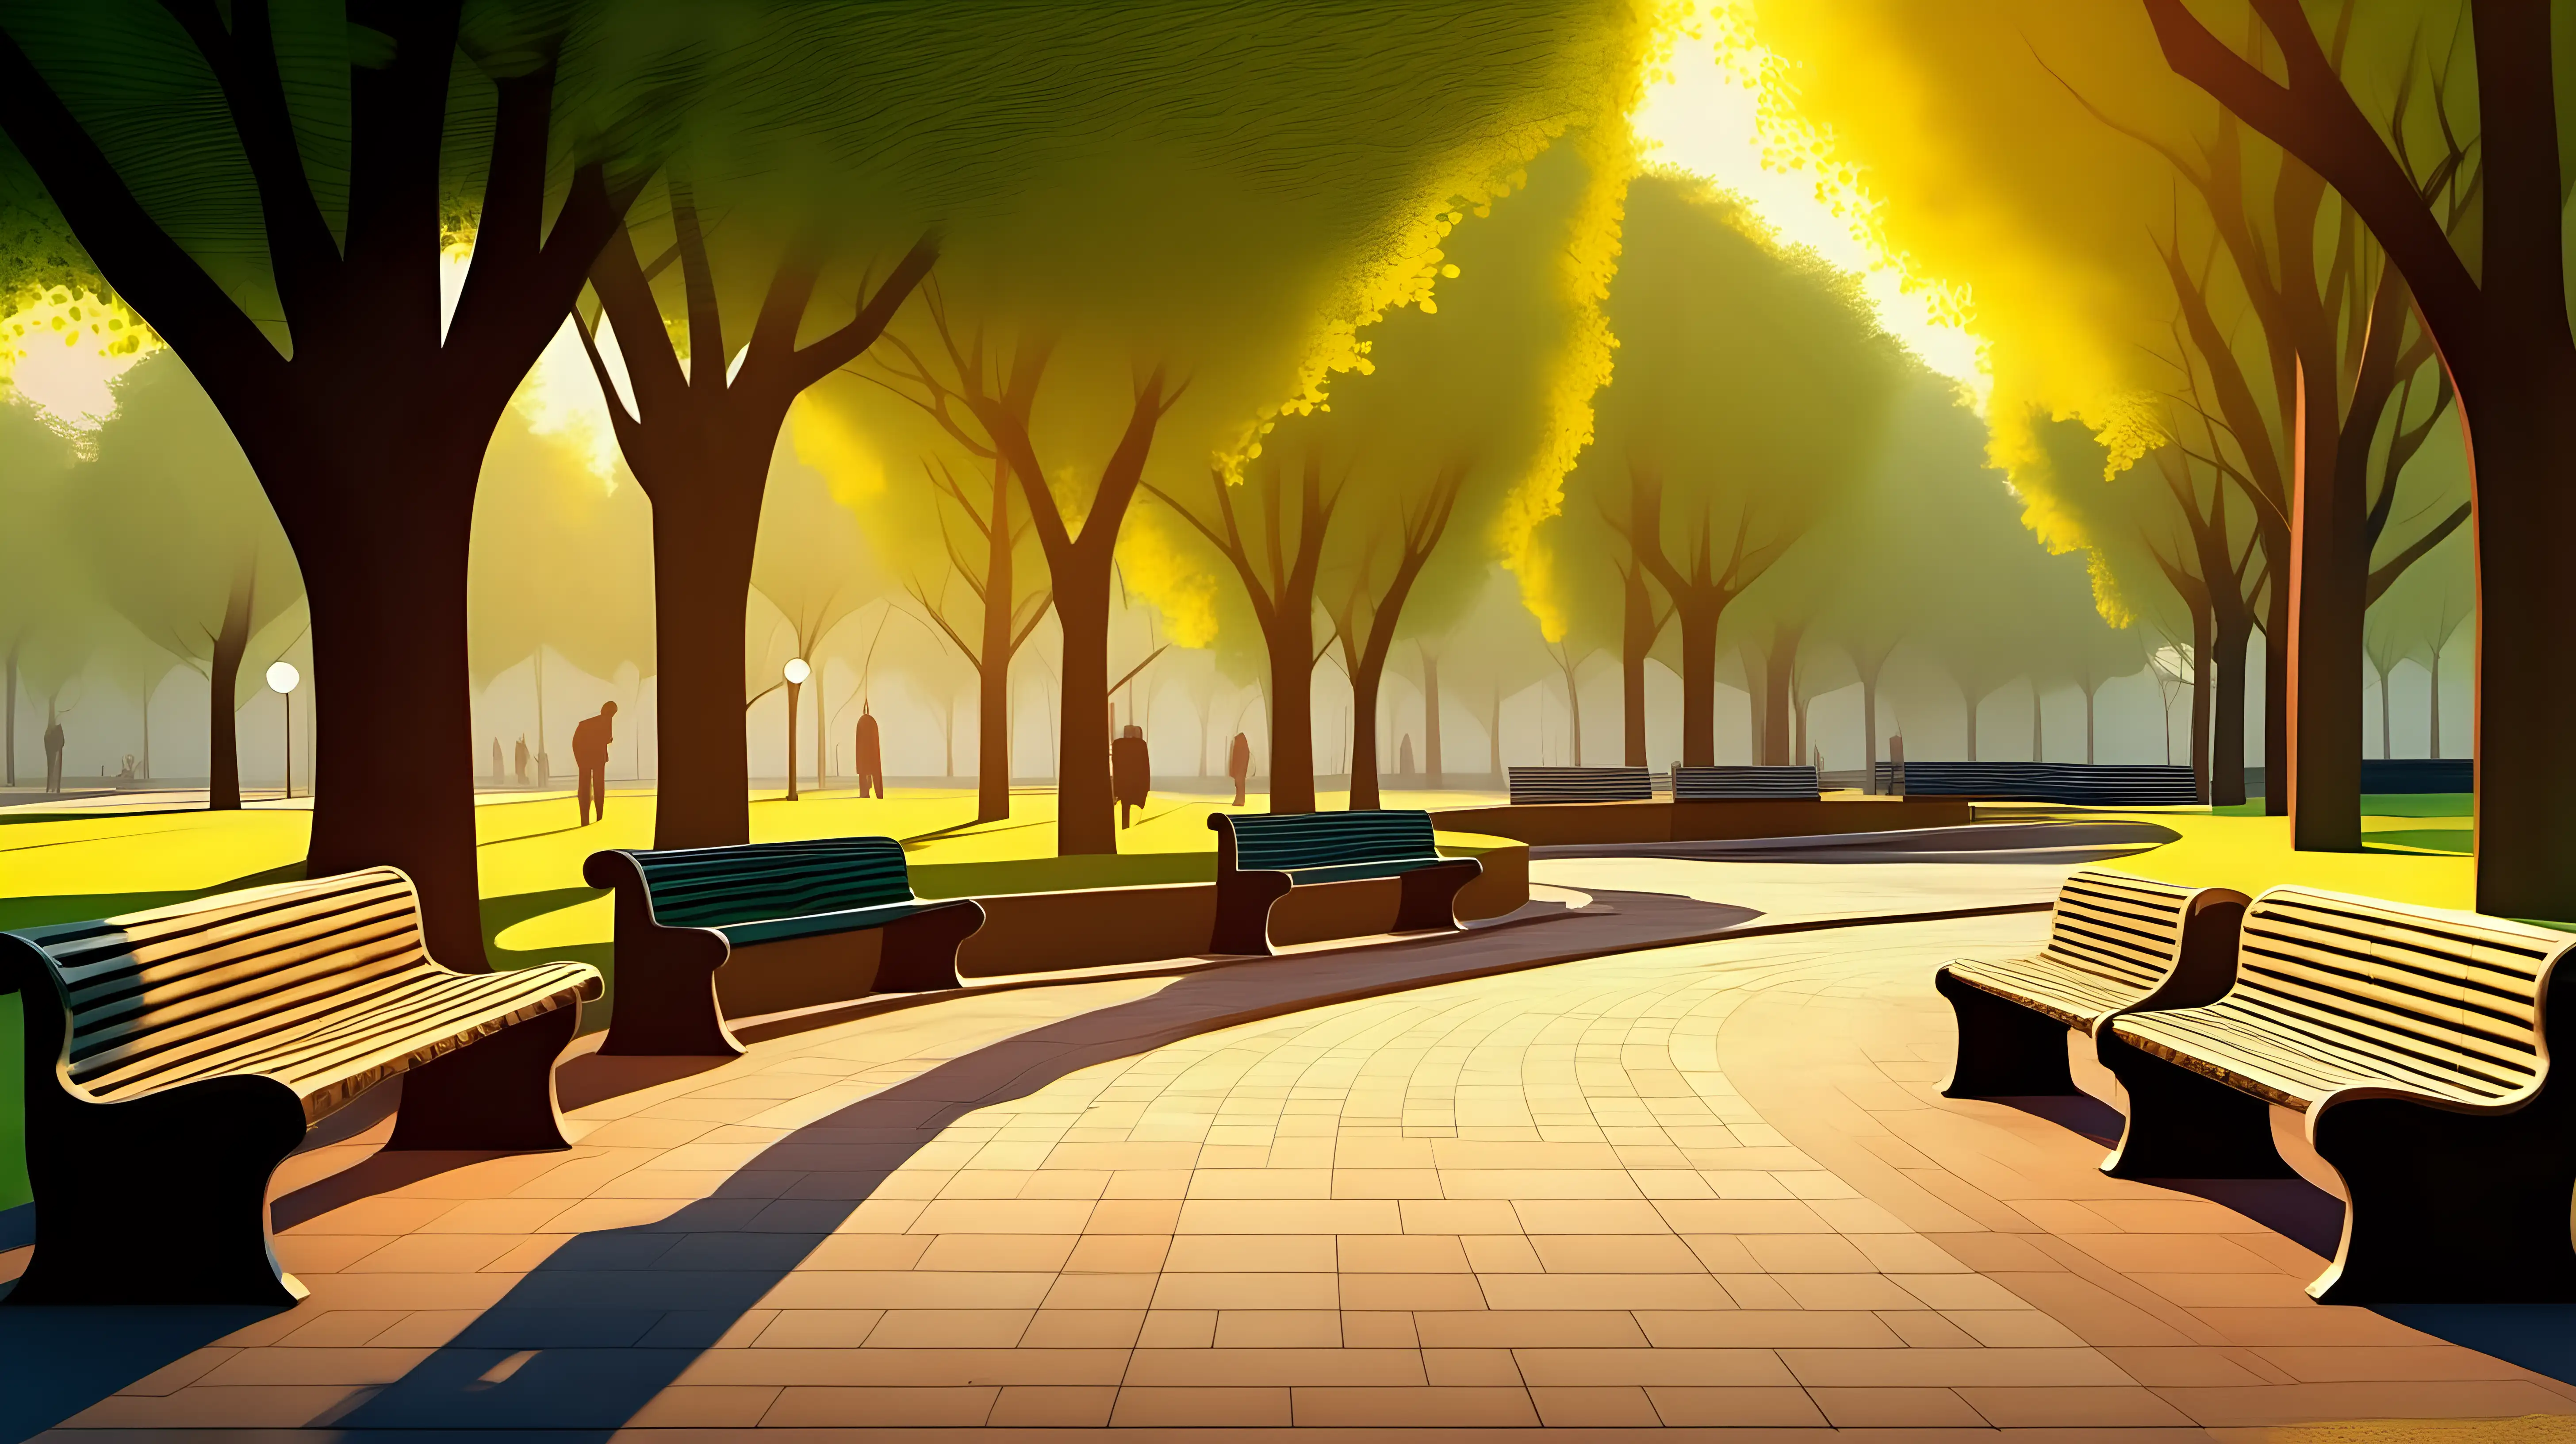 A peaceful park with a winding path and benches, bathed in the soft light of the setting sun, creating long shadows.